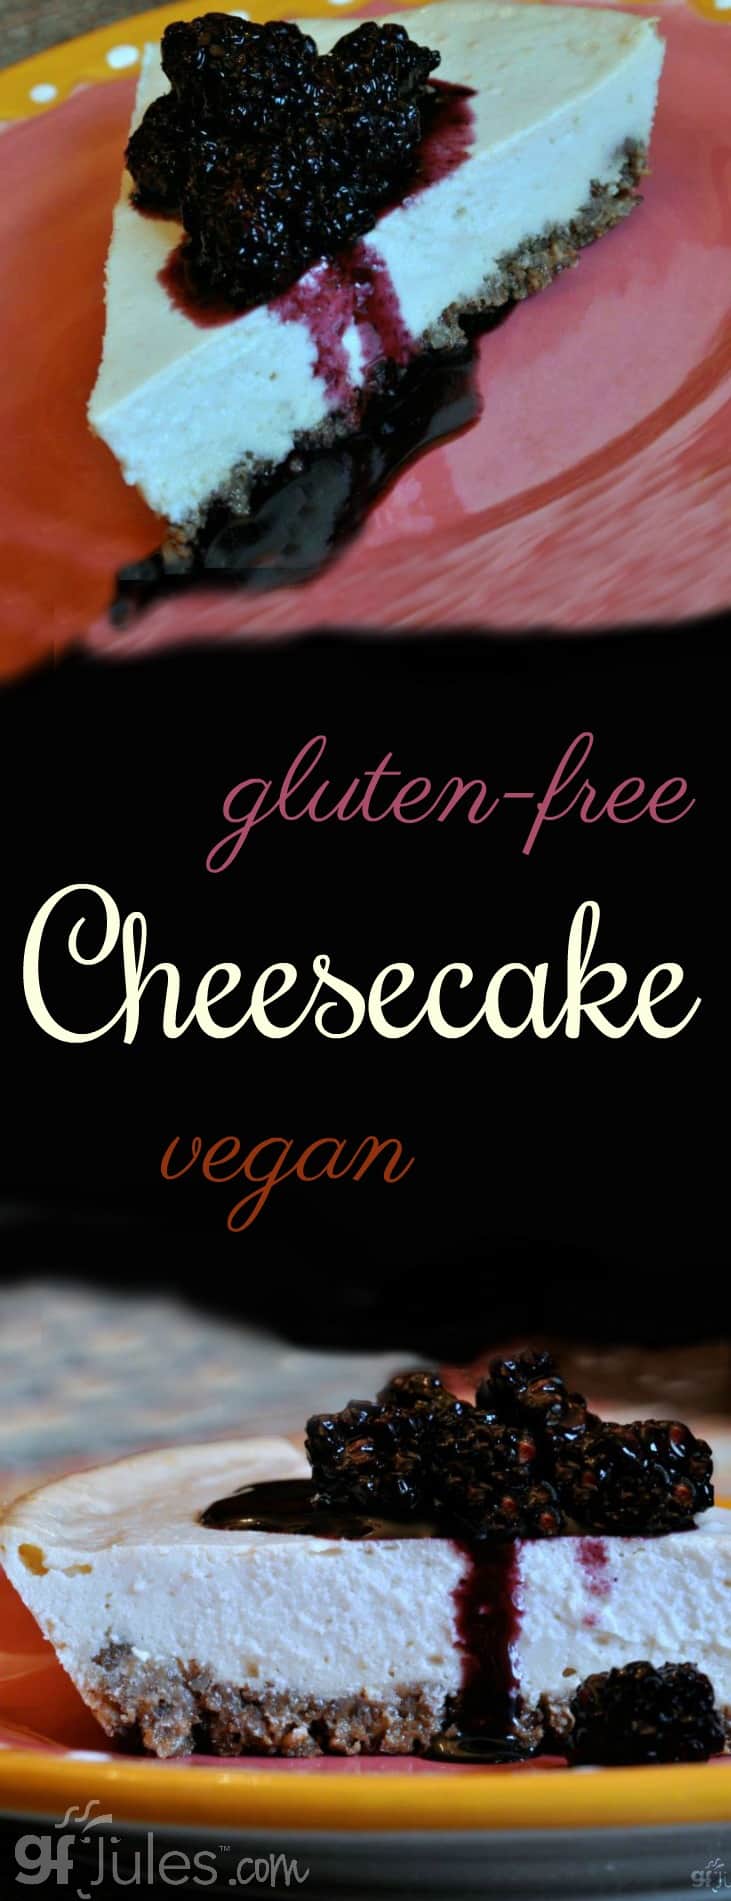 Gluten Free Vegan Cheesecake defies all the odds! Creamy, and delicious gfJules.com